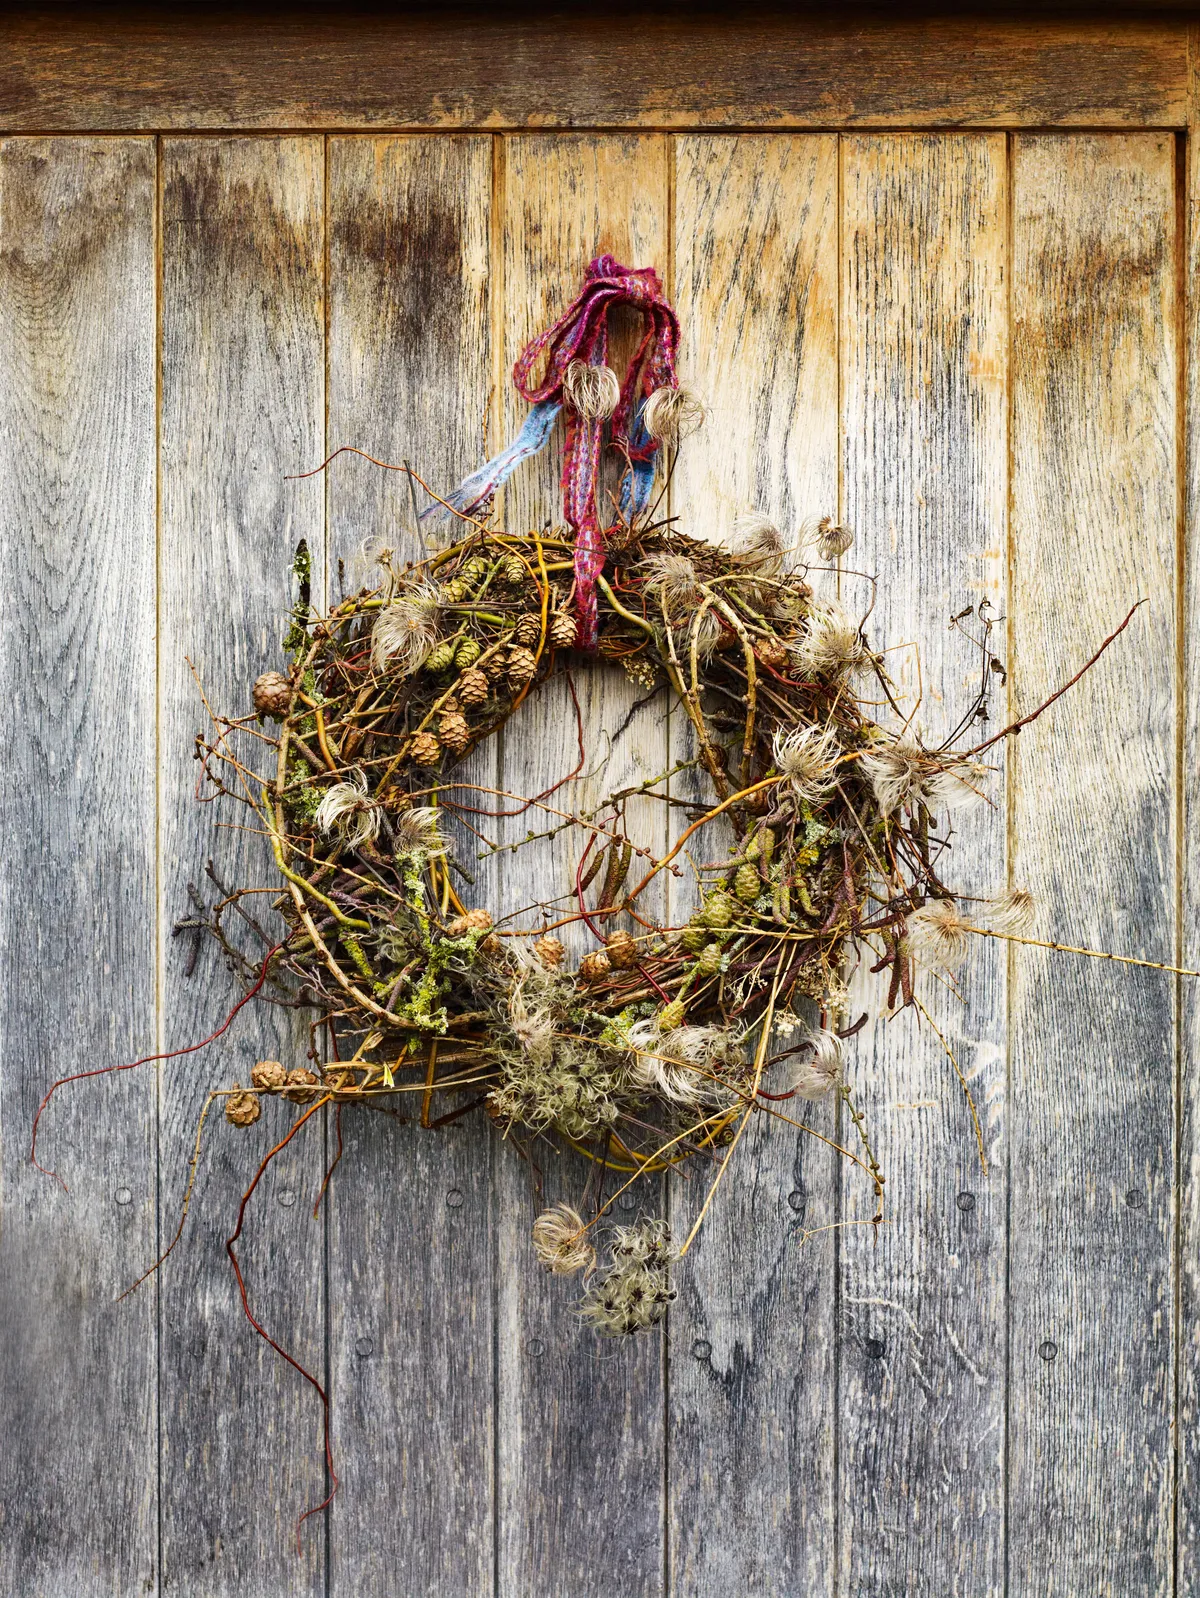 Wreath made from natural materials